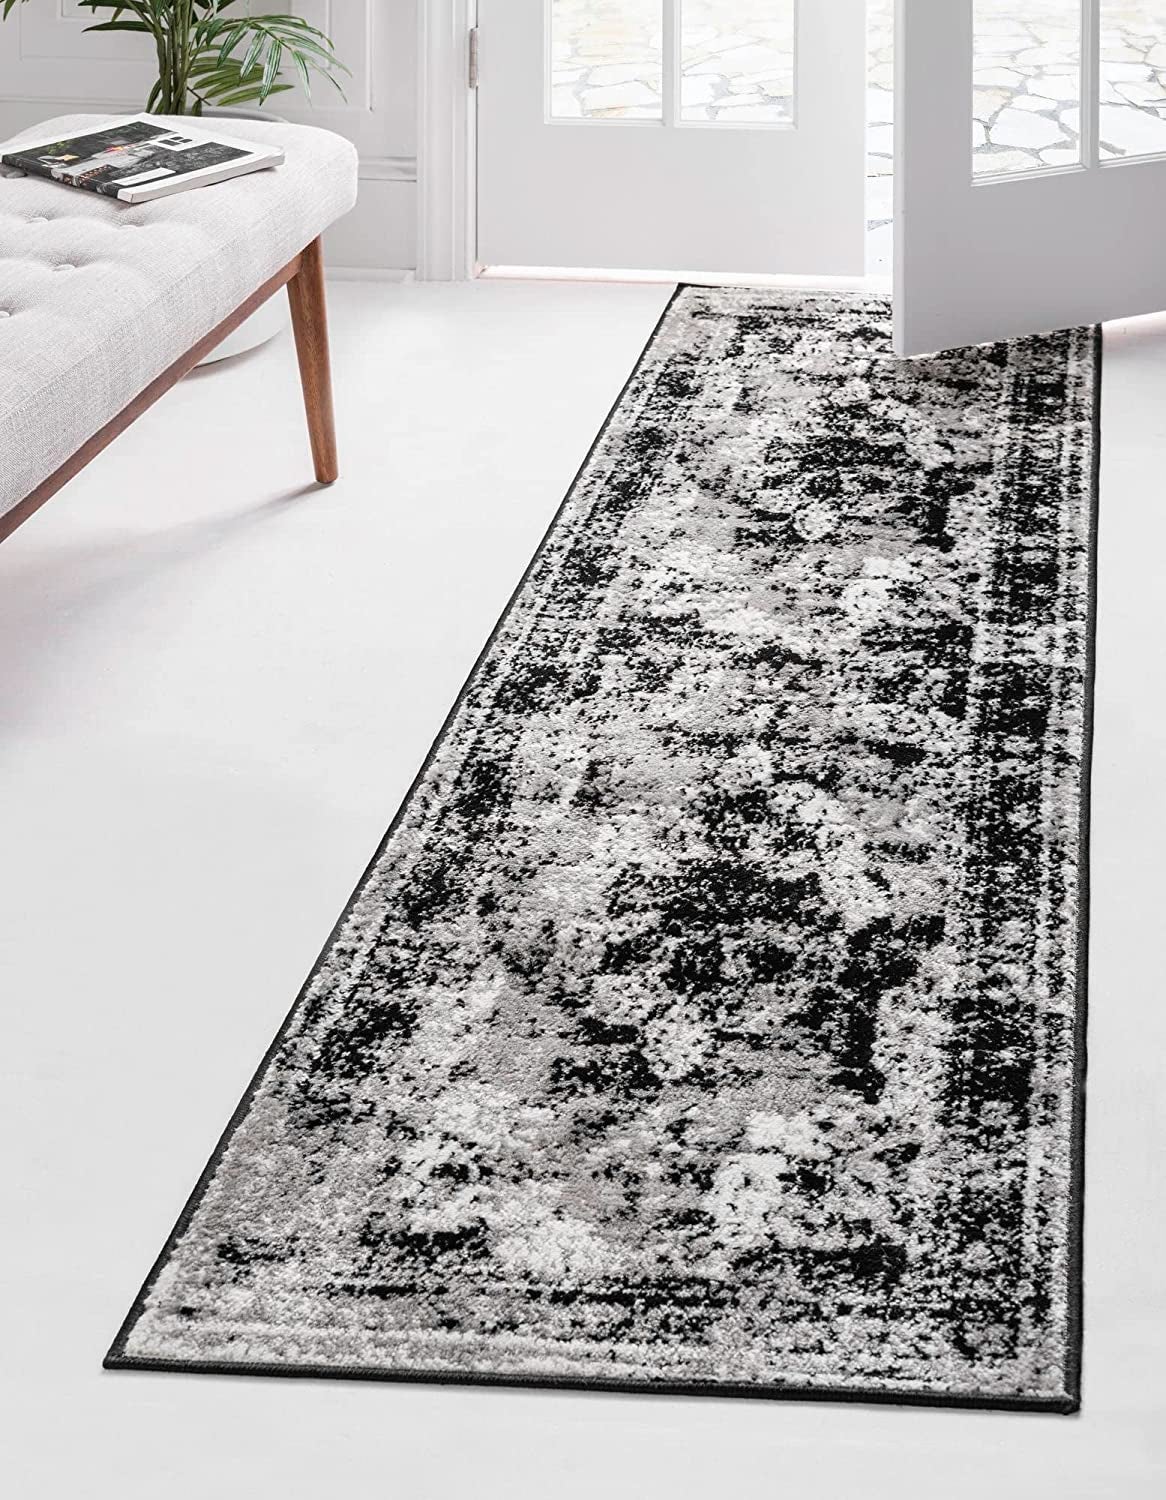 black, gray, and white rug runner with antique-inspired design